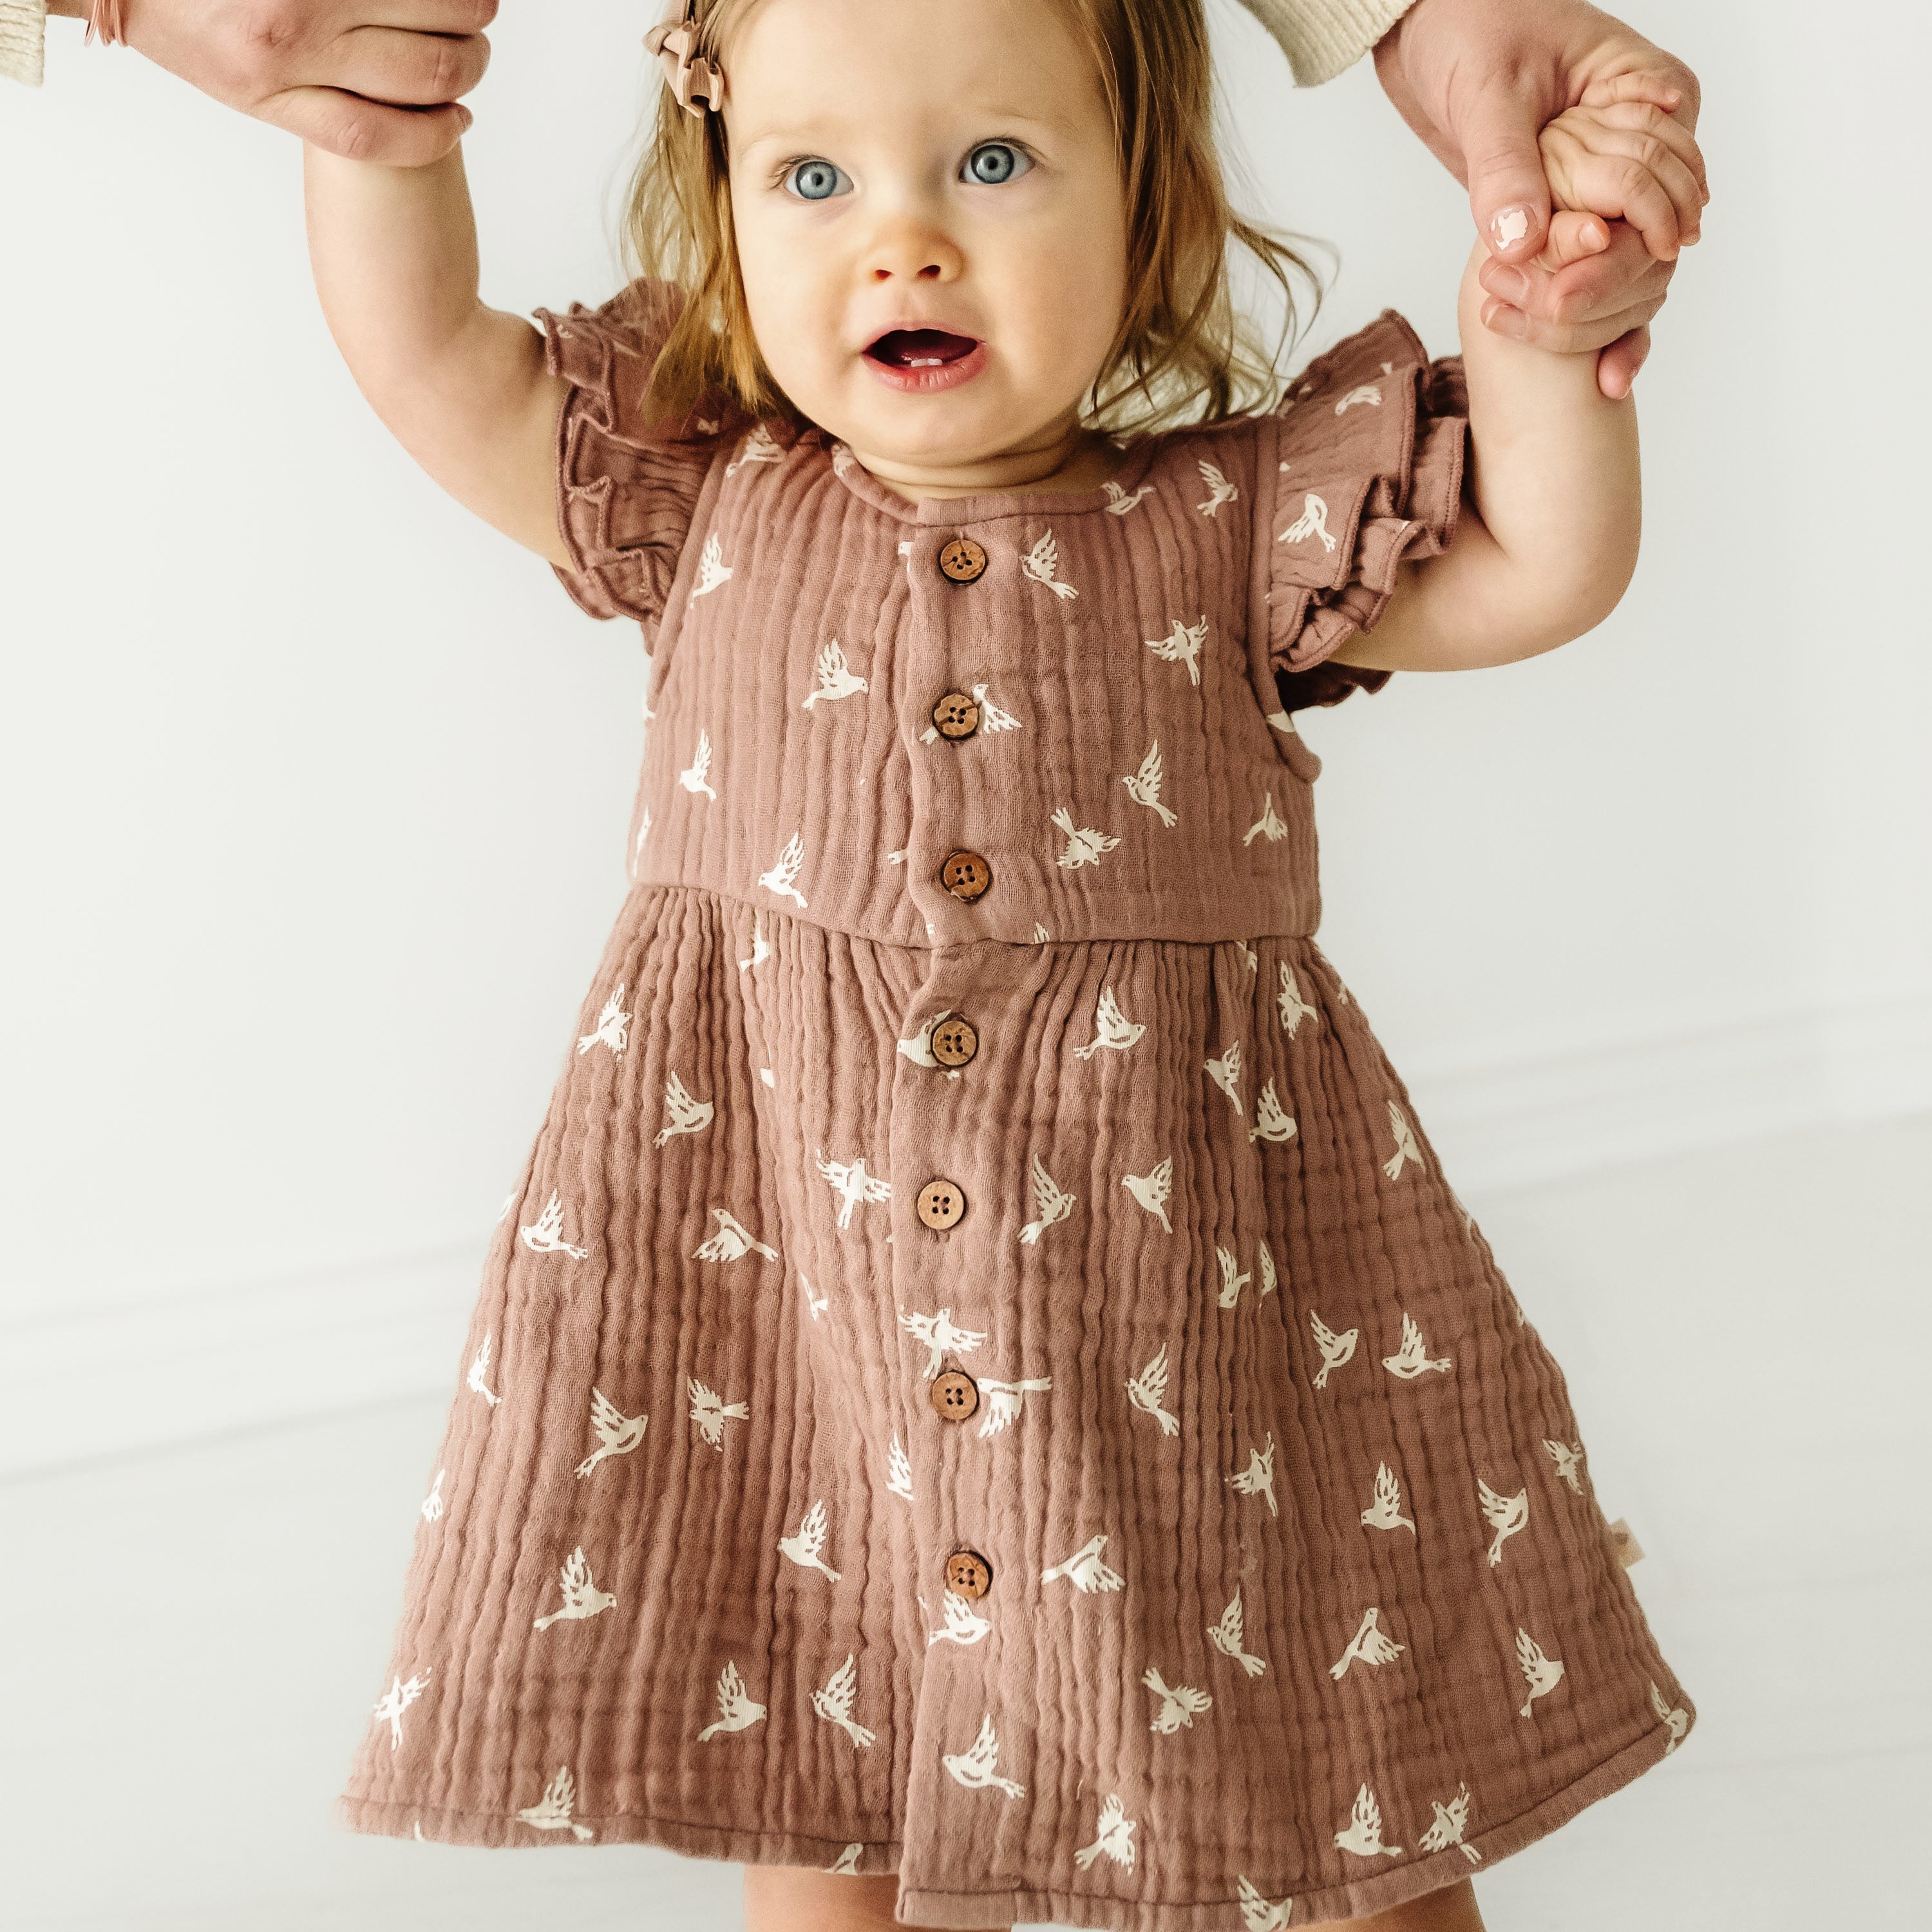 A toddler girl in a Organic Muslin Button Flutter Dress - Flock by Makemake Organics looks up with wide eyes and excitement, holding an adult’s hands. She stands against a clean, white background.